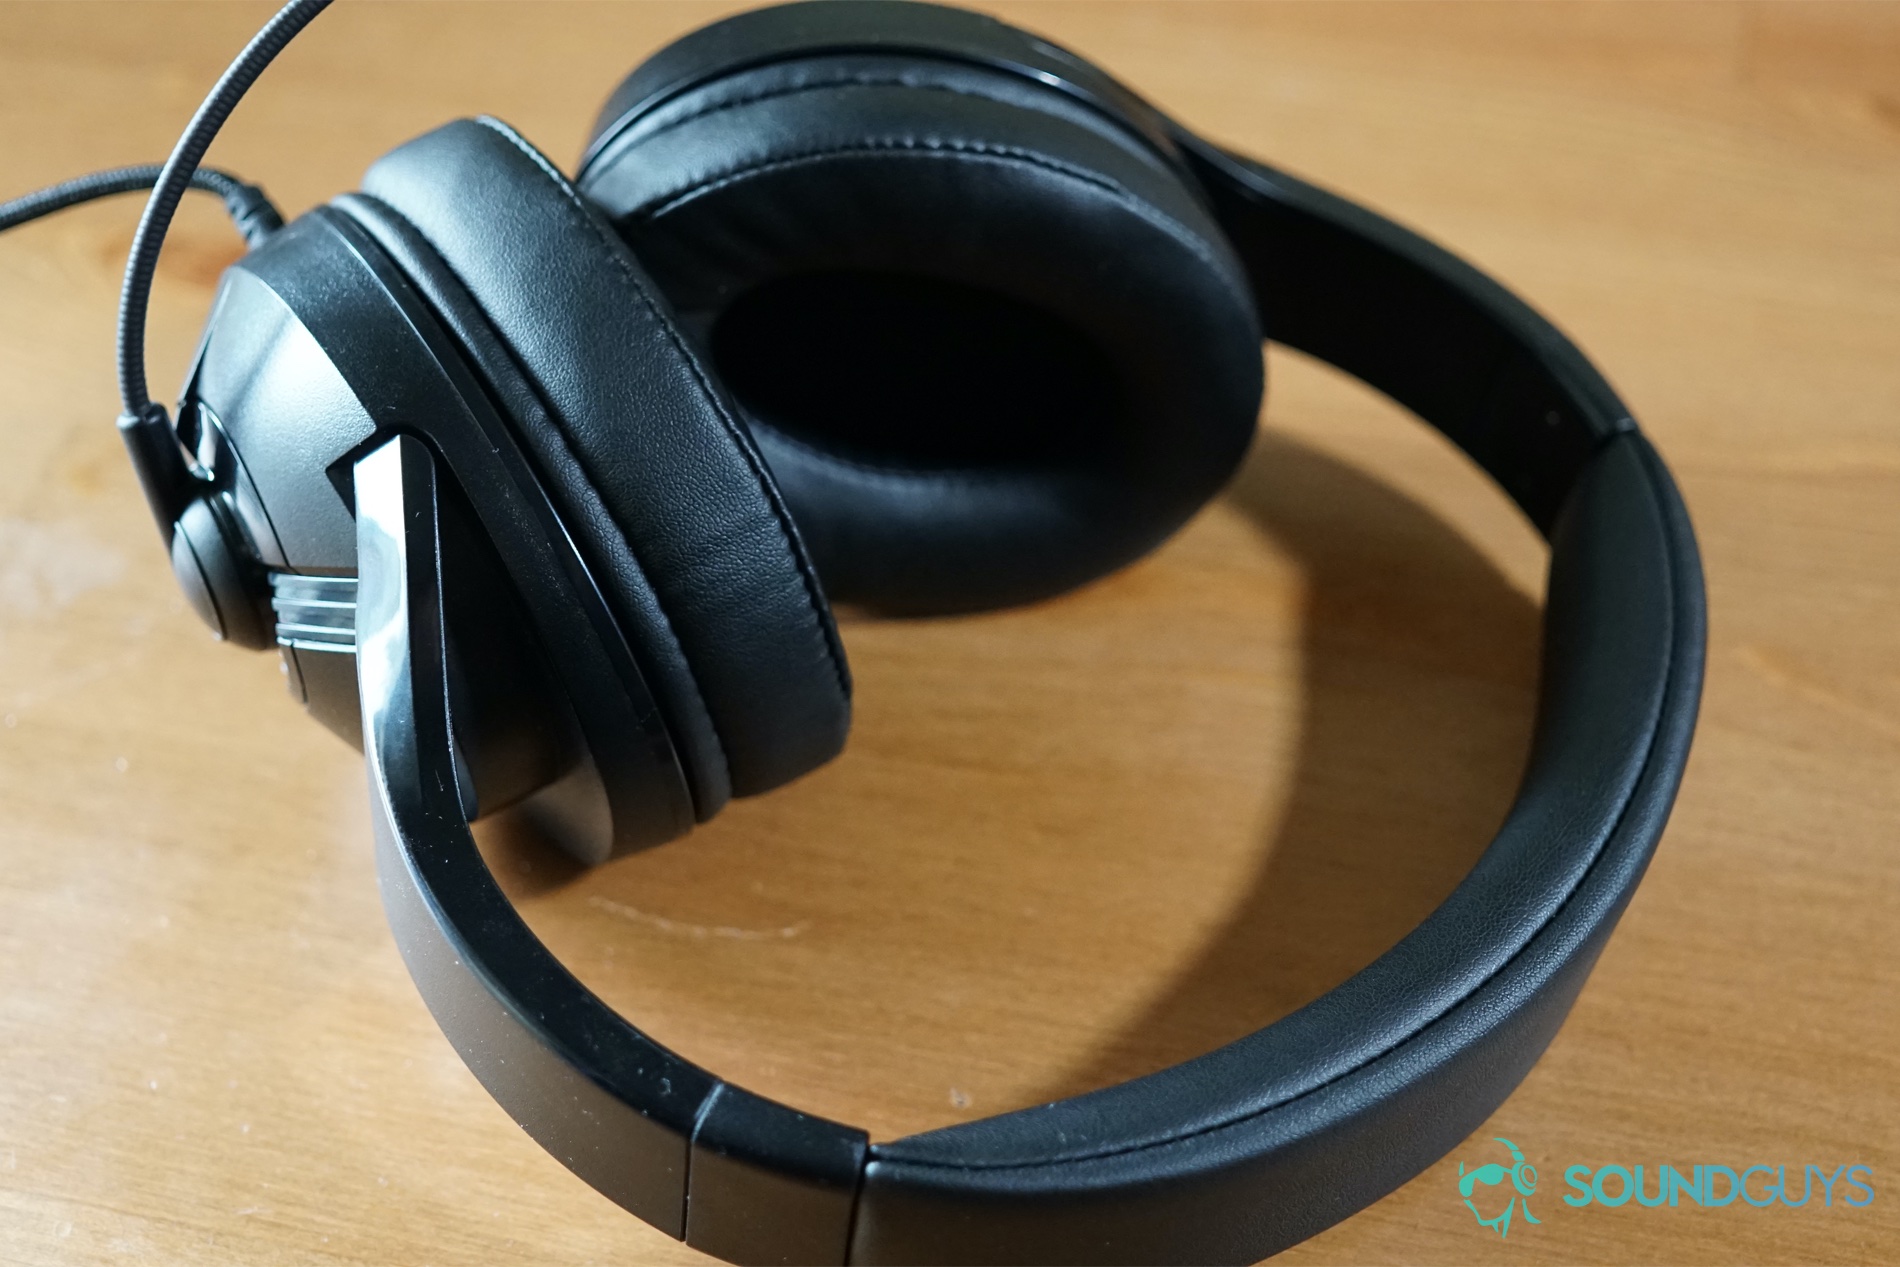 The AmazonBasics USB Gaming Headset sits on a wooden table, with its mic pointed forward.